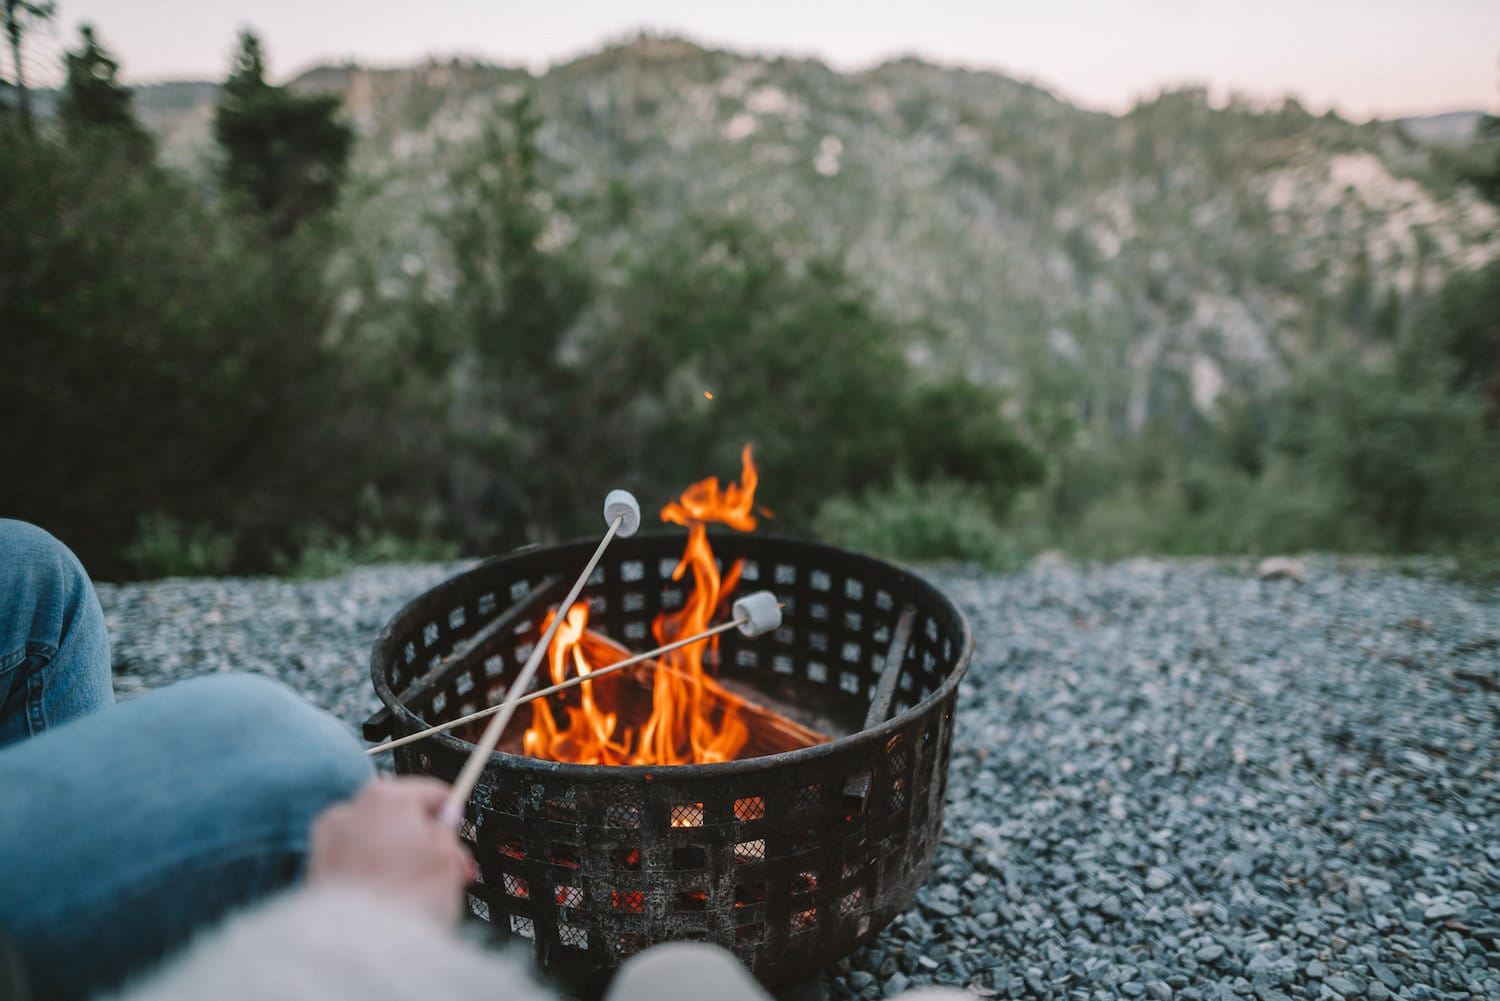 Roasting marshmallows by the fire at Getaway for a romantic getaway from Los Angeles